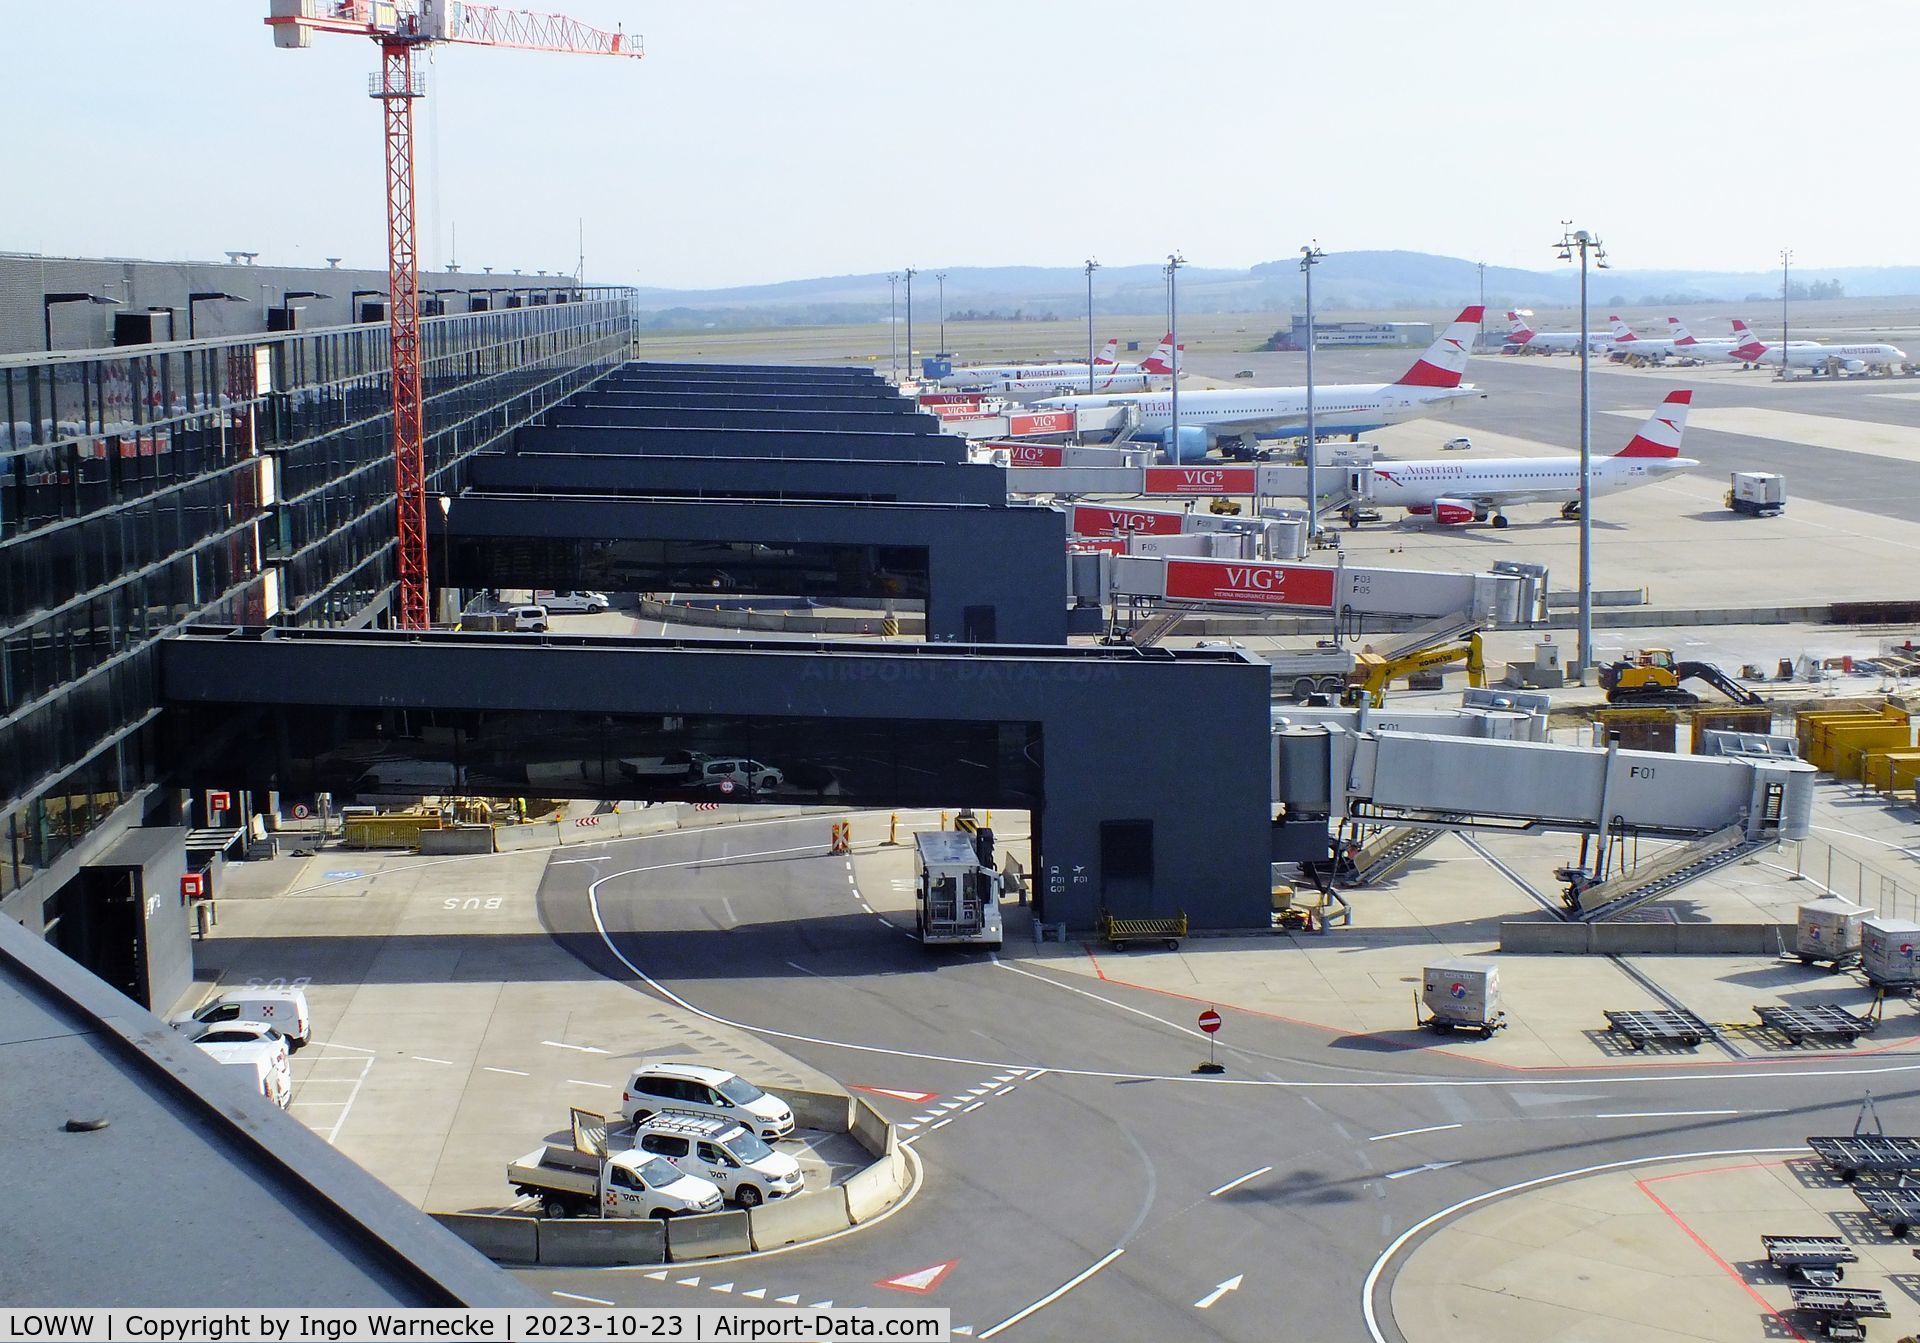 Vienna International Airport, Vienna Austria (LOWW) - southern side of gates building F/G at the eastern end of terminal 3 at Wien airport